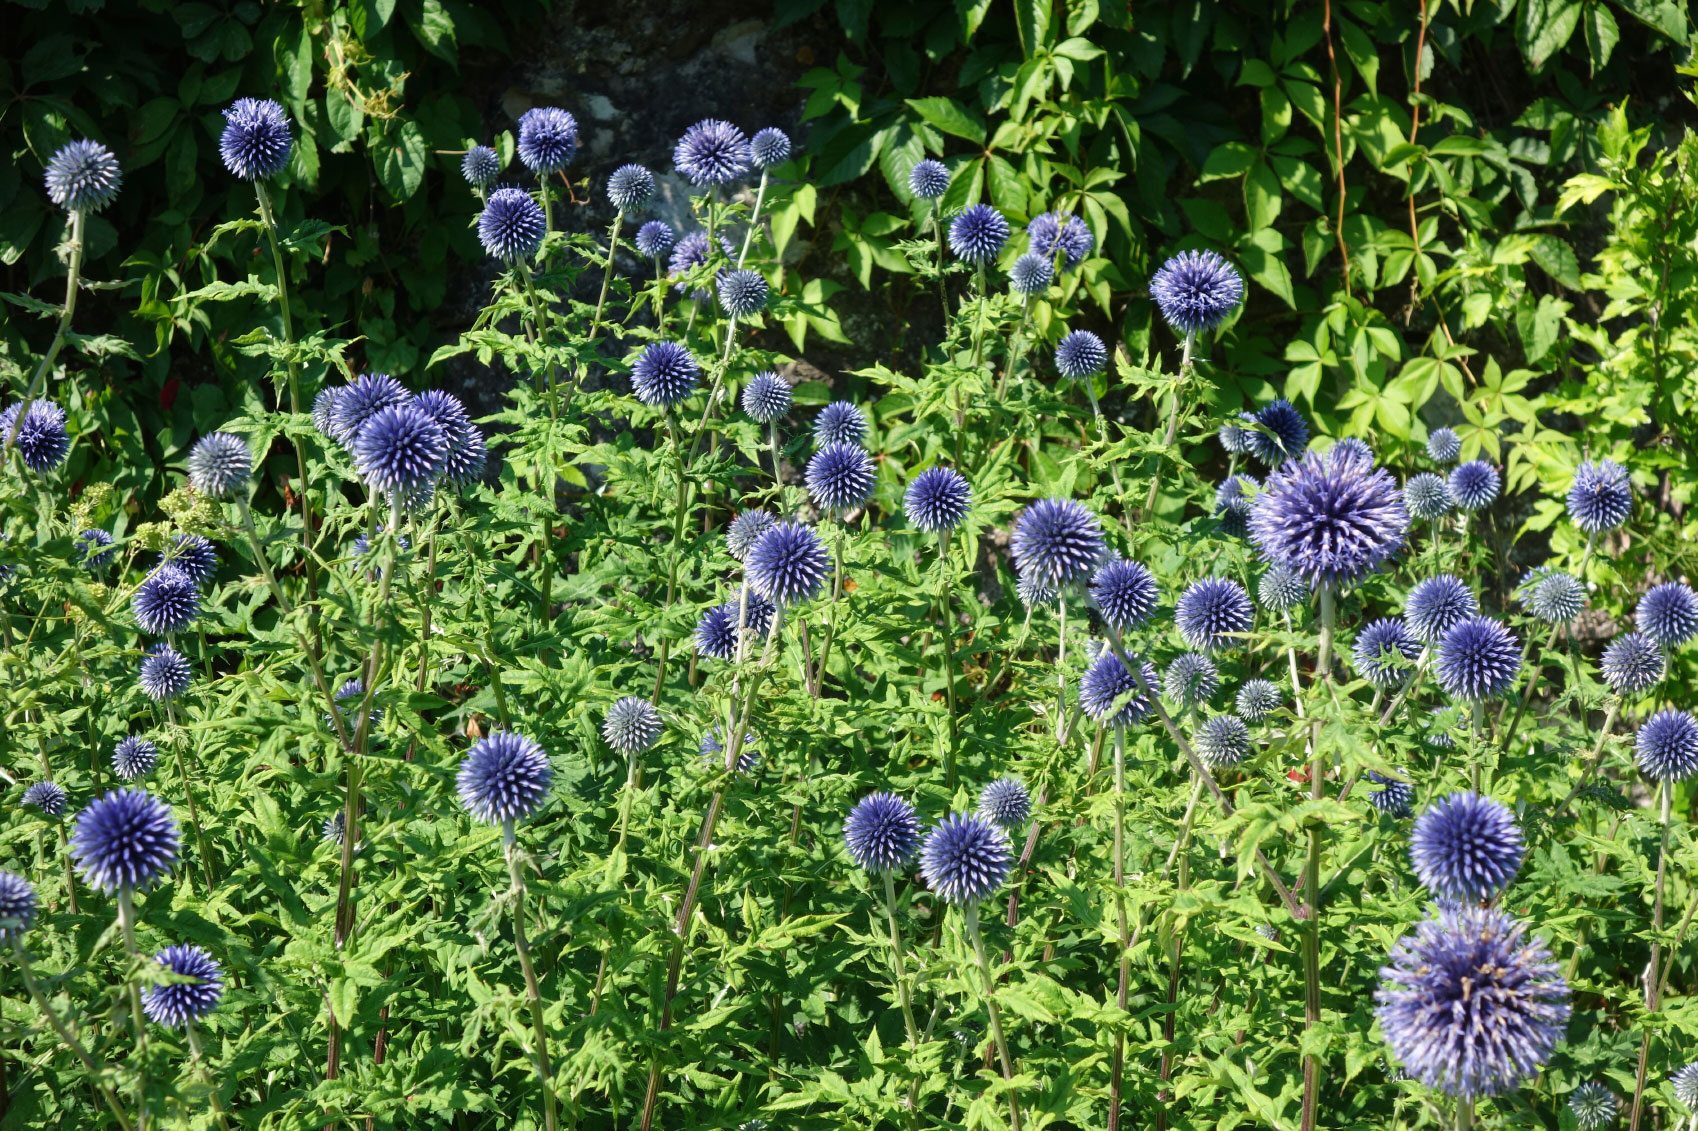 Growing Globe Thistle Flowers ? Information About Globe Thistle Echinops